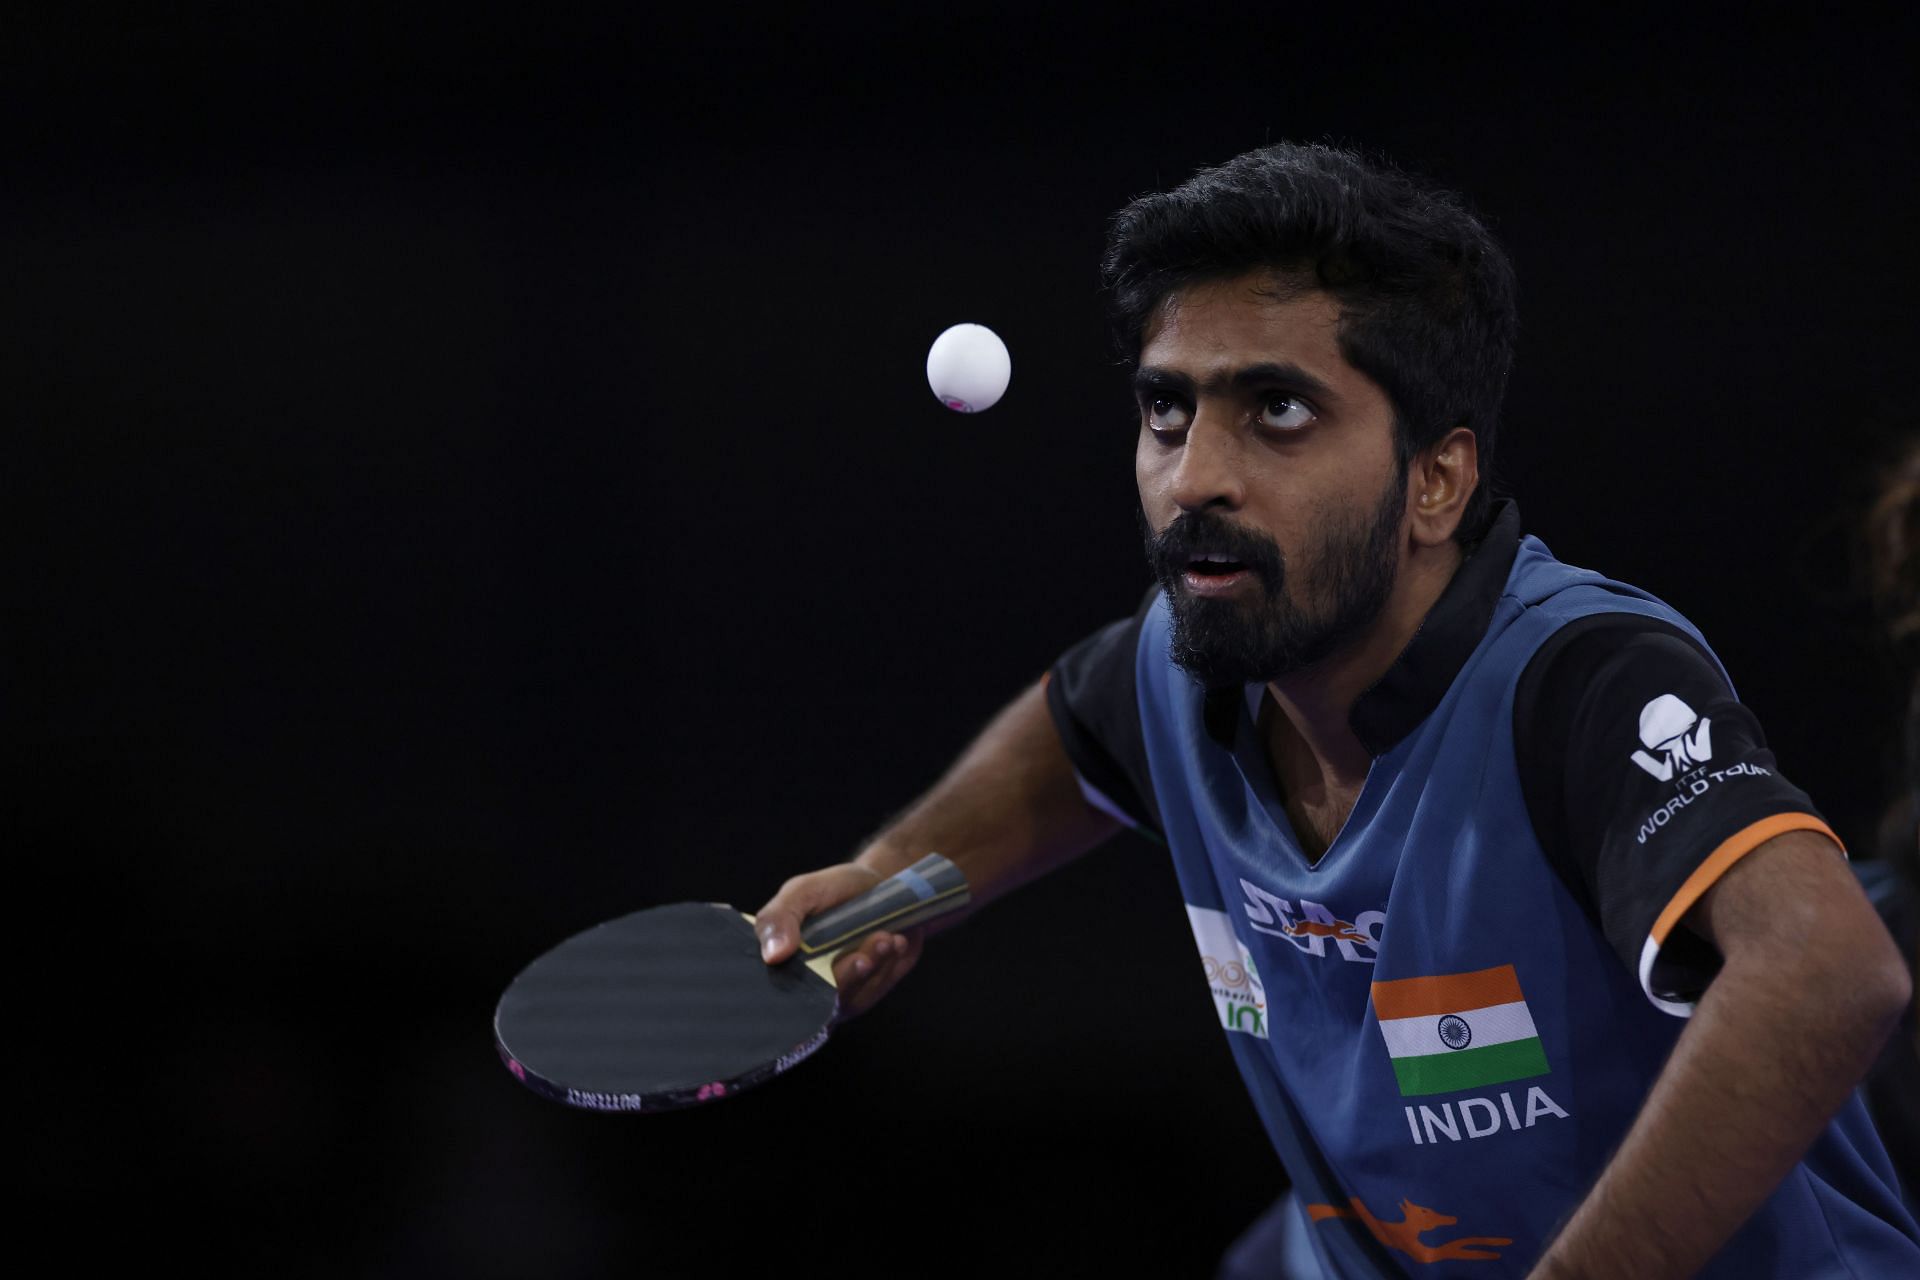 Top-ranked Indian table tennis player G Sathiyan in action. (PC: Getty Images)